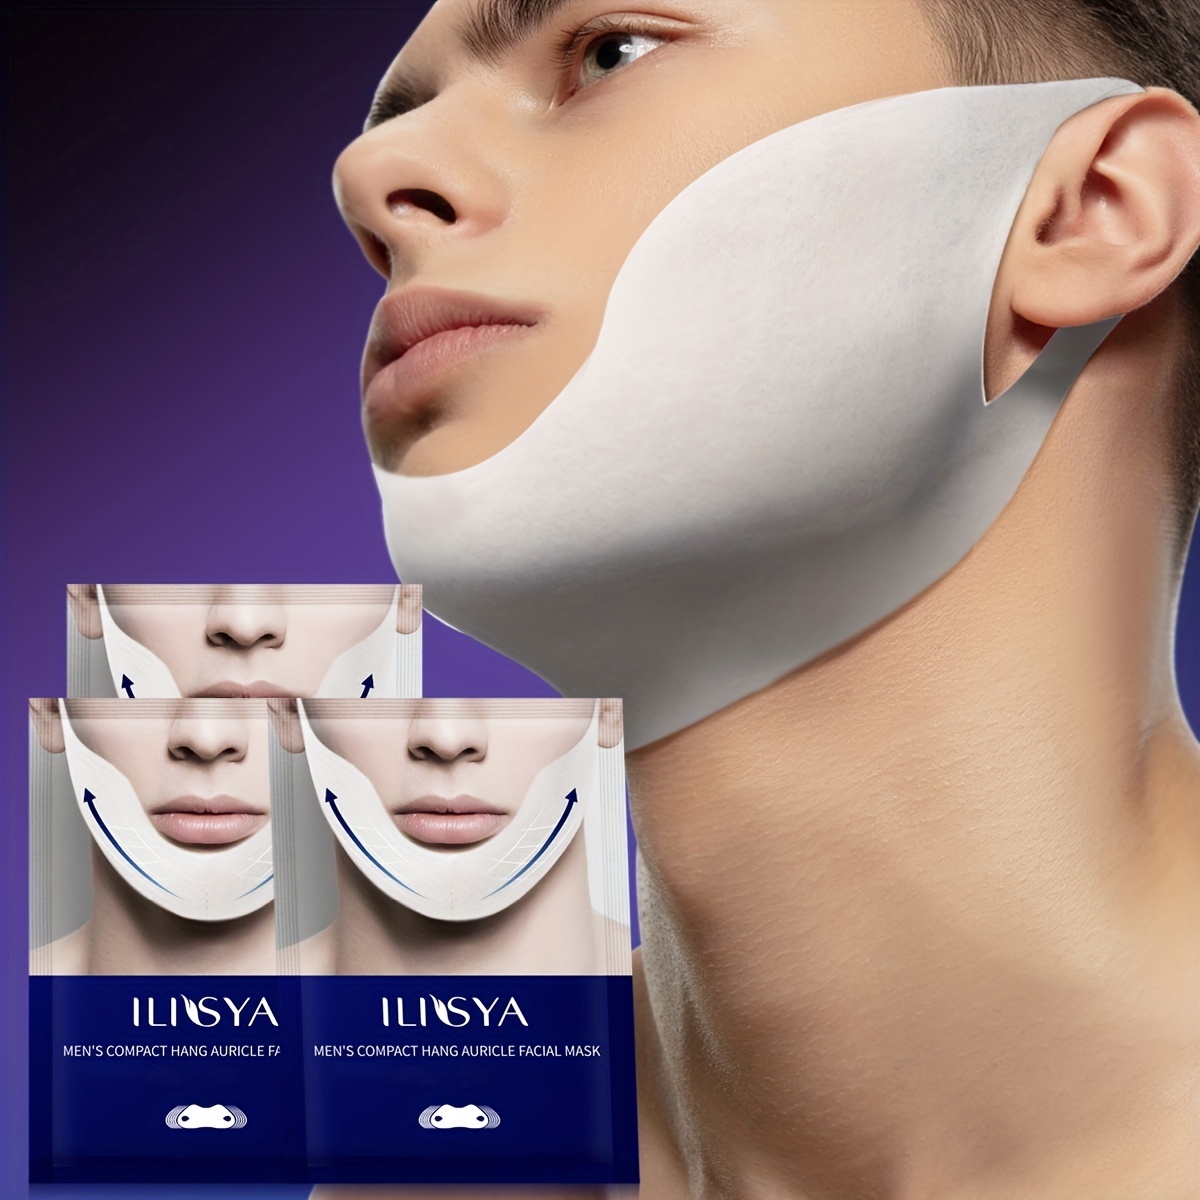 Face V Shaper Bandage - Facial Firming Mask for Skin Tightening and Lifting  – TweezerCo